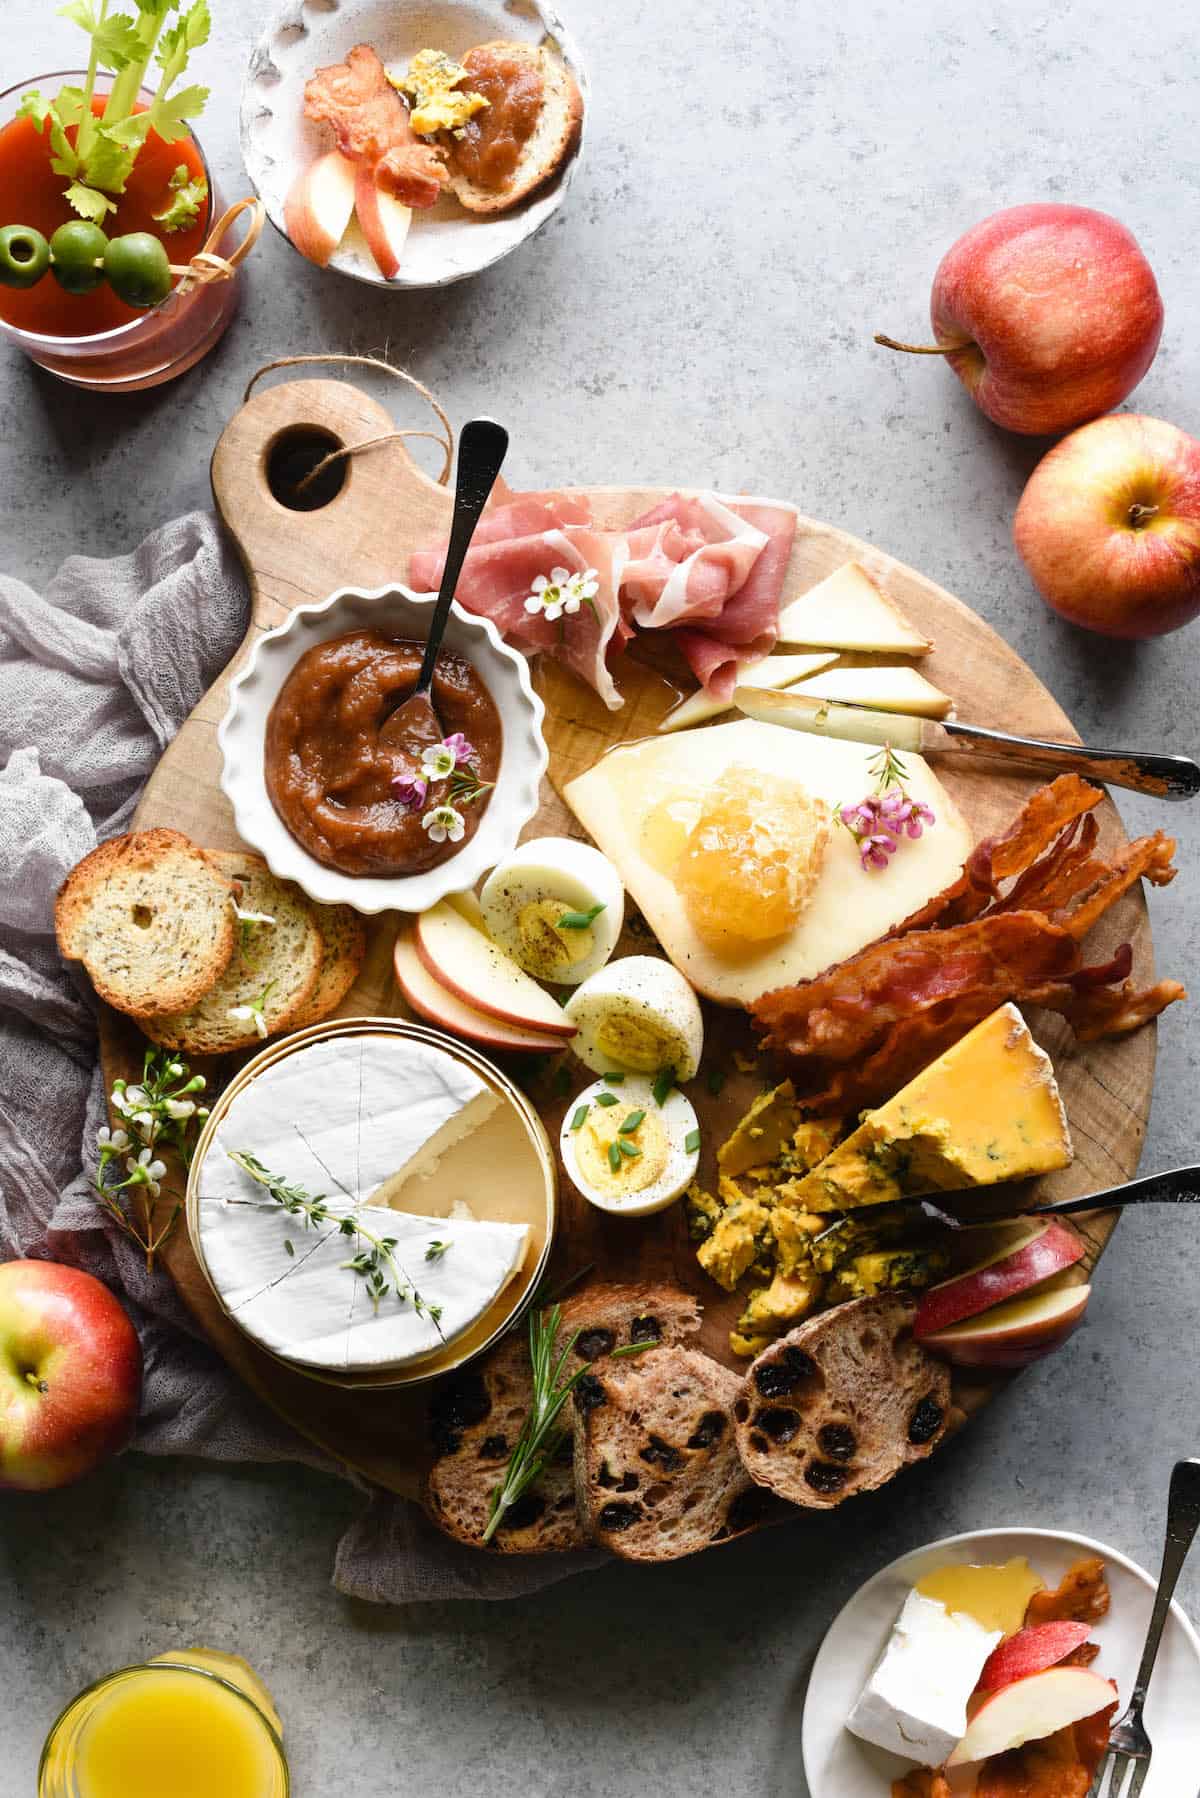 A breakfast charcuterie board - a round wooden cutting board filled with breakfast platter items like cheese, hard boiled eggs, bread, apple butter, bacon and prosciutto.